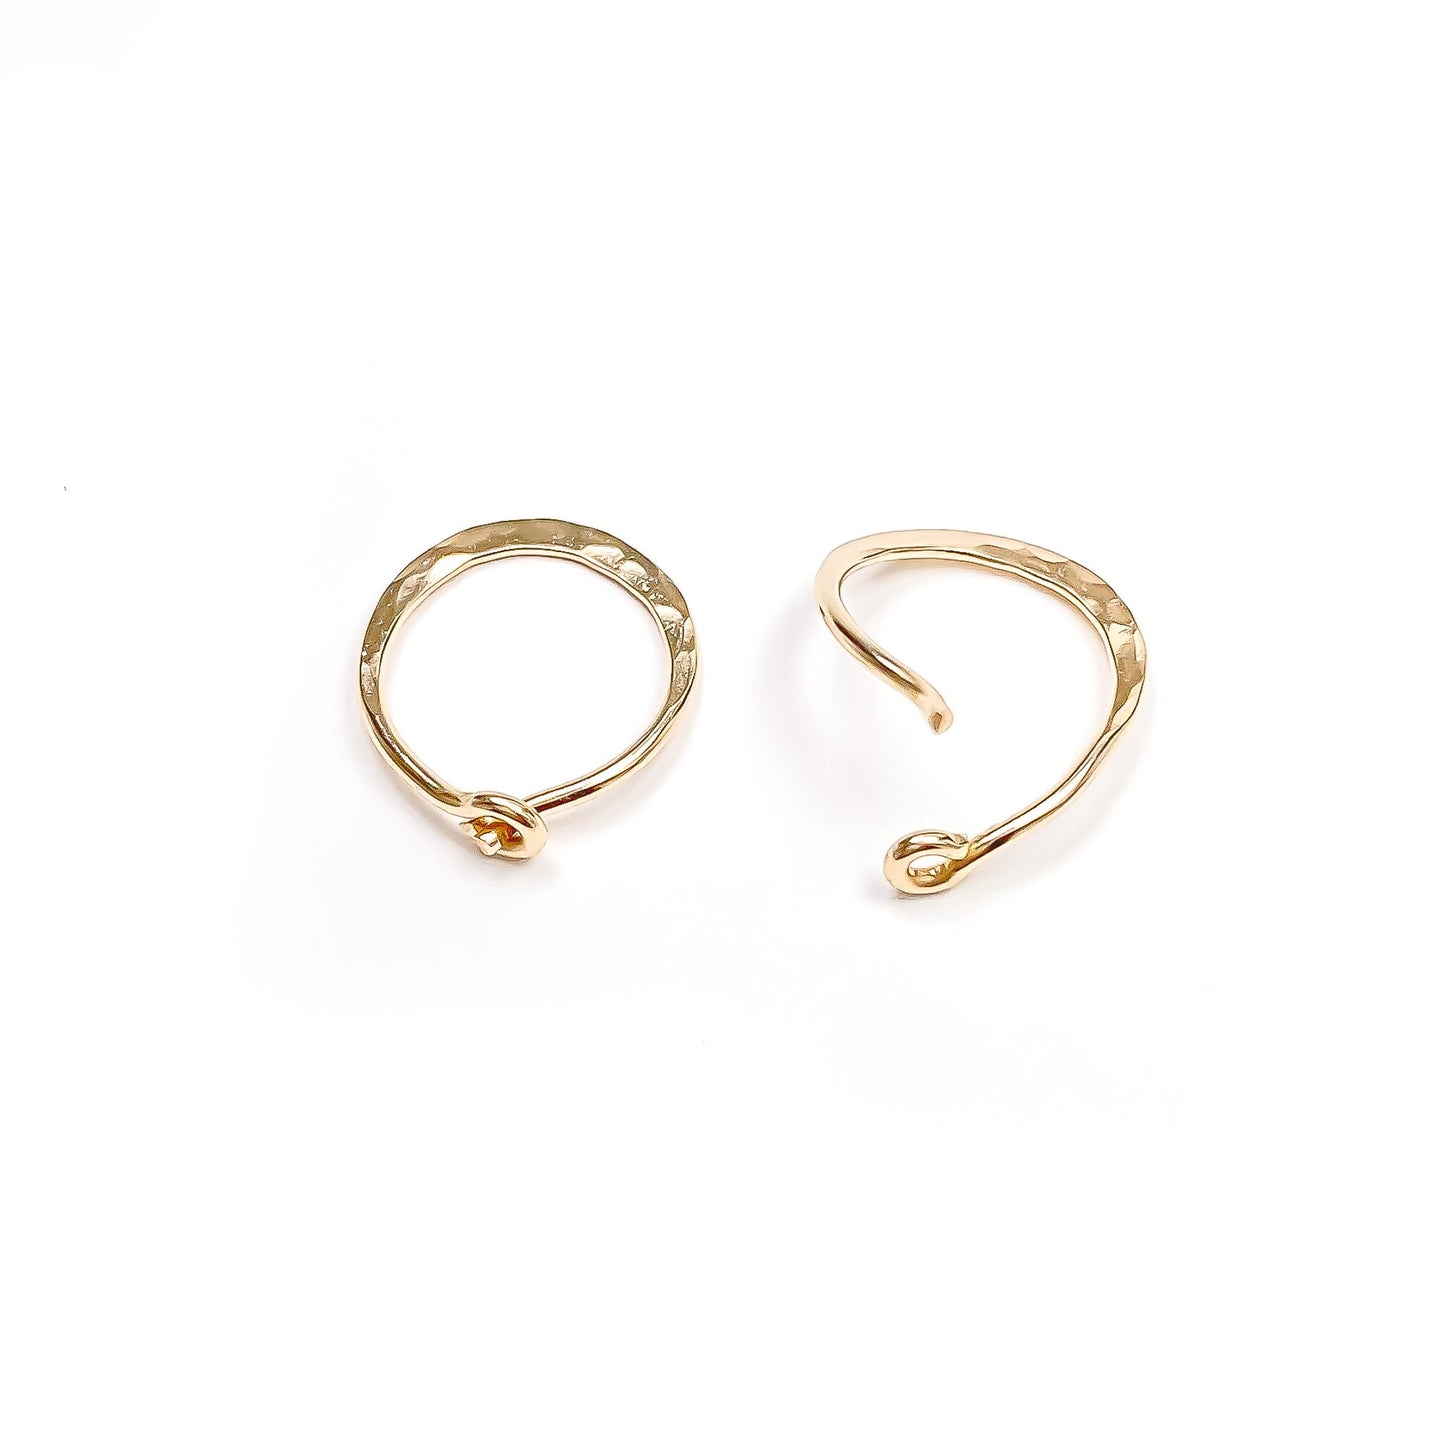 Hammered Small Hoops, 10mm